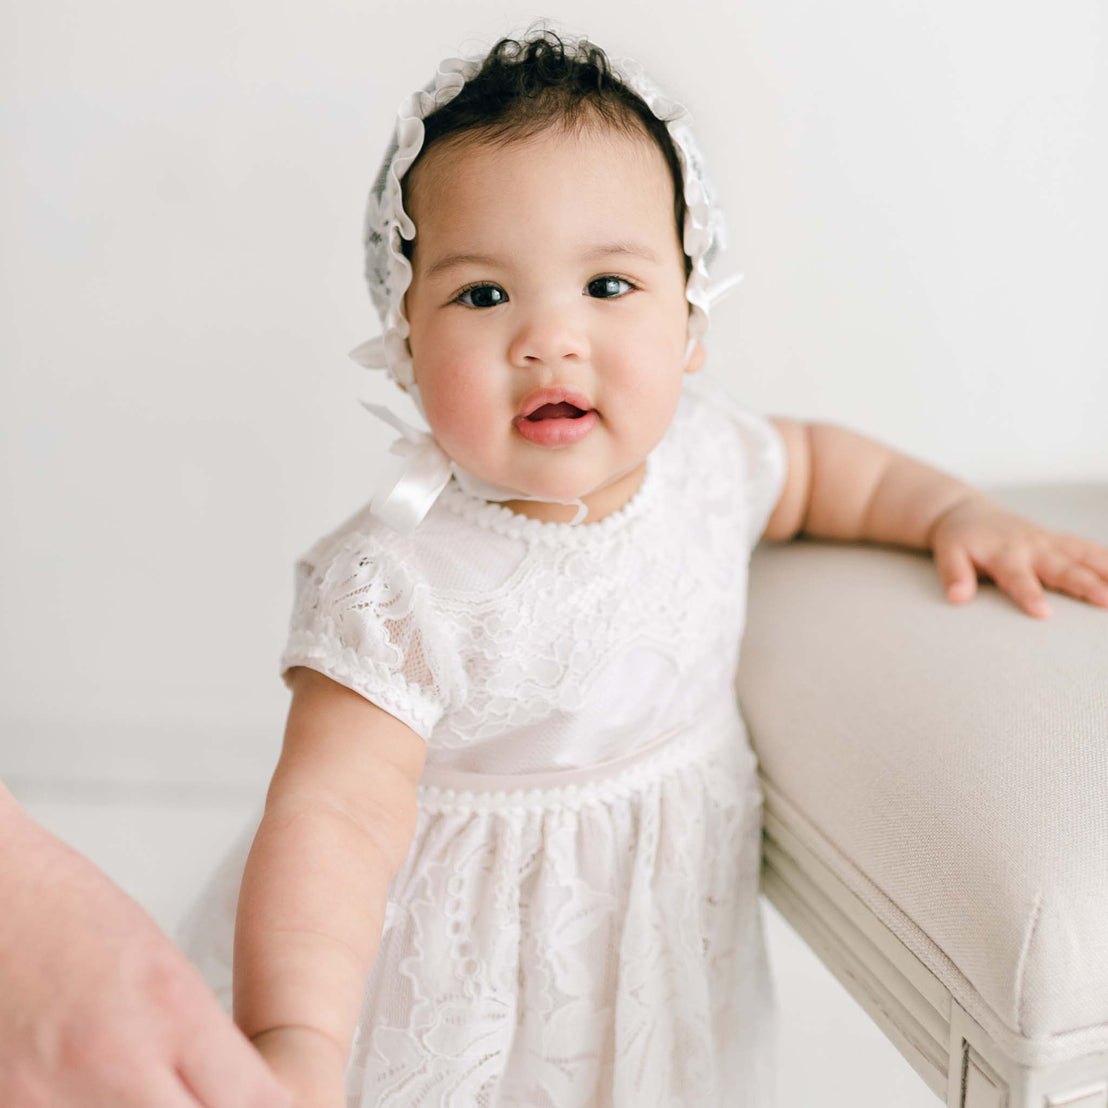 A baby wearing the Victoria Puff Sleeve Christening Dress with the Victoria Lace Christening Bonnet is holding onto the edge of a beige cushioned surface. The baby is looking towards the camera with a neutral expression, and an adult hand is gently holding one of the baby's hands.